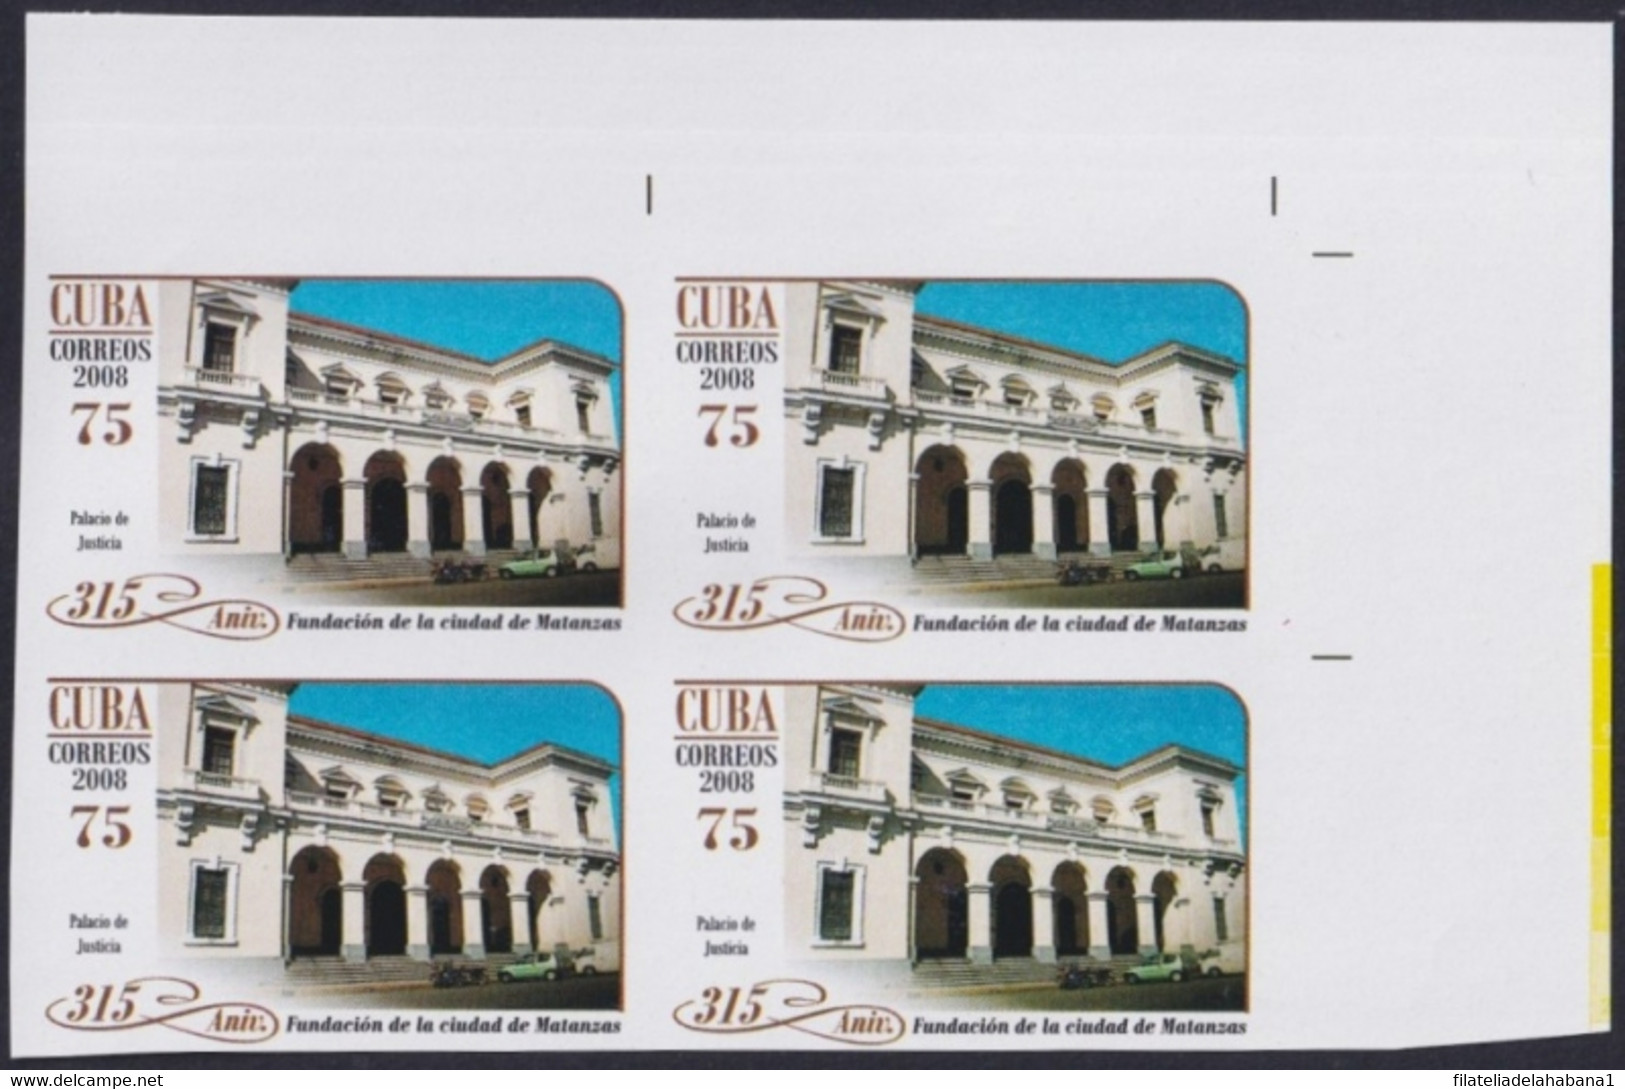 2008.412 CUBA 2008 75c MNH IMPERFORATED PROOF MATANZAS FOUNDATION PALACE OF JUSTICE. - Ongetande, Proeven & Plaatfouten